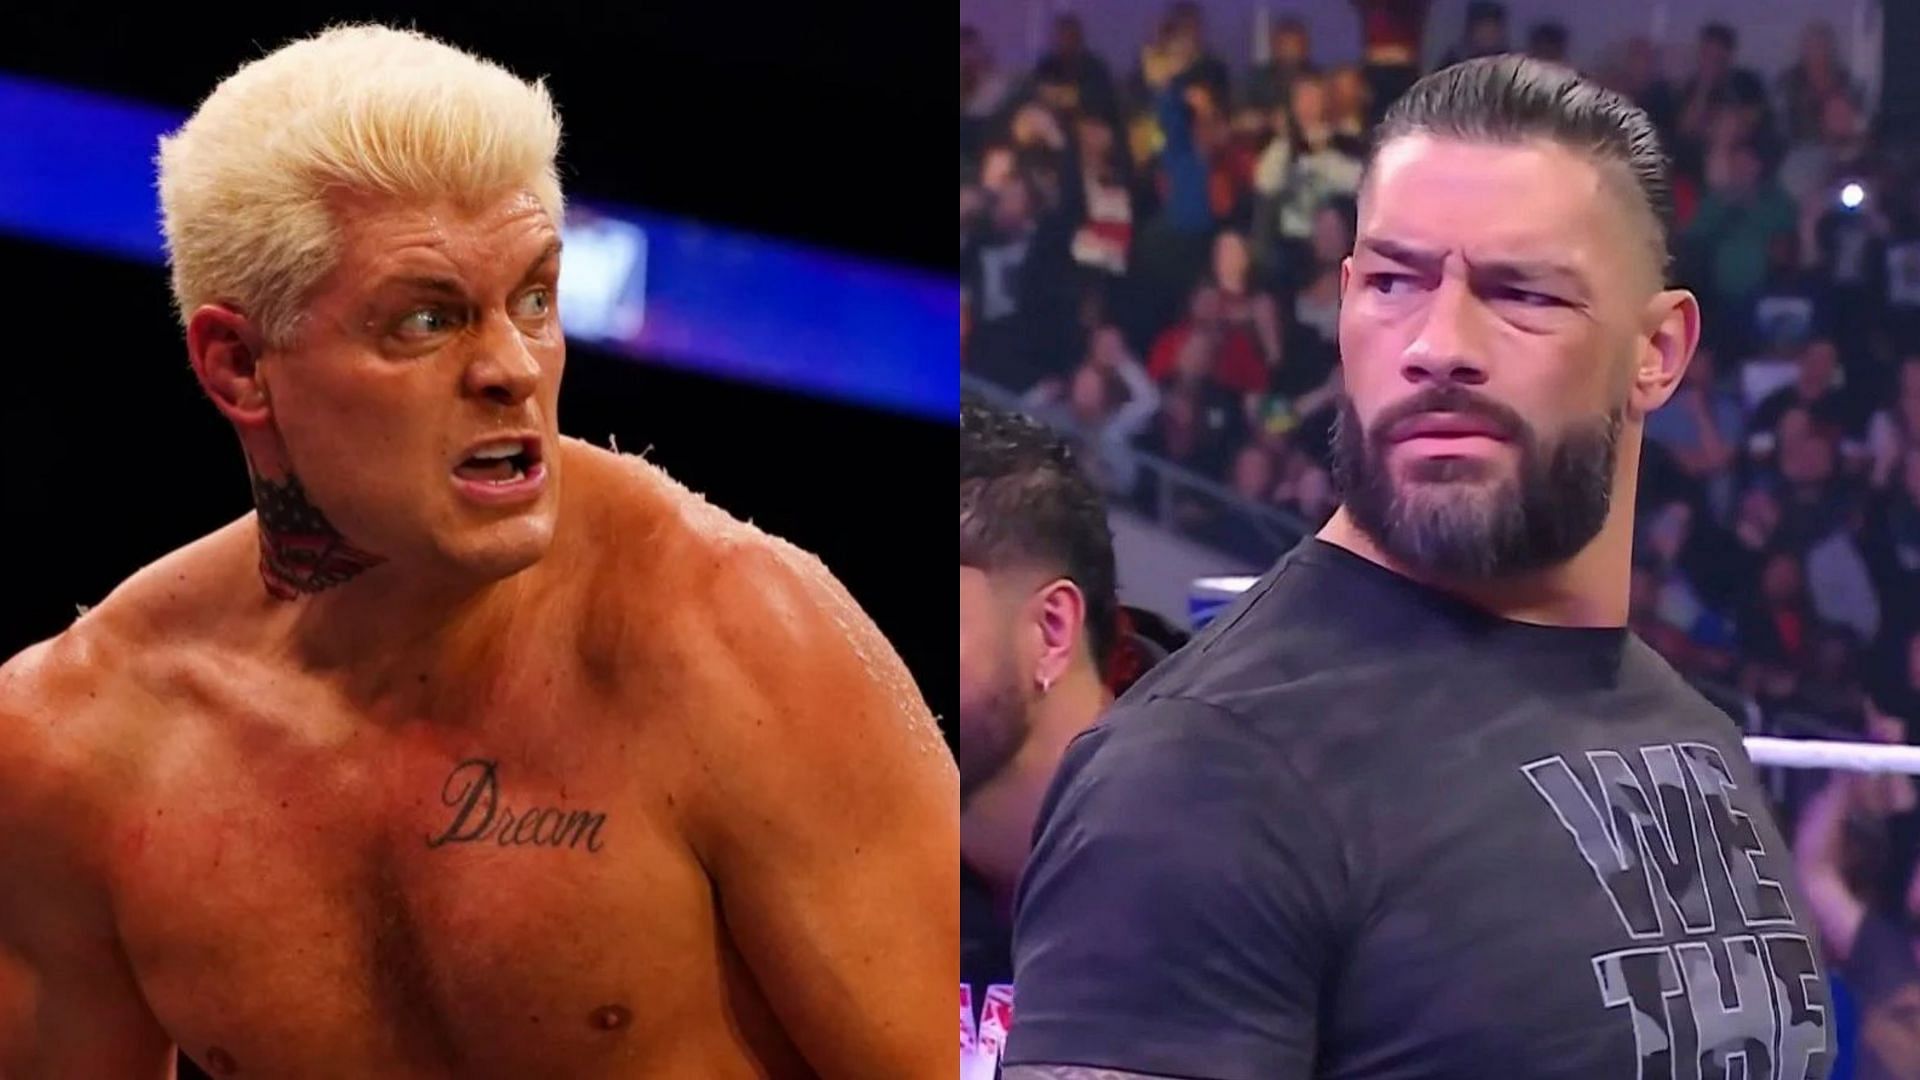 Cody Rhodes (left) and Undisputed WWE Universal Champion Roman Reigns (right)